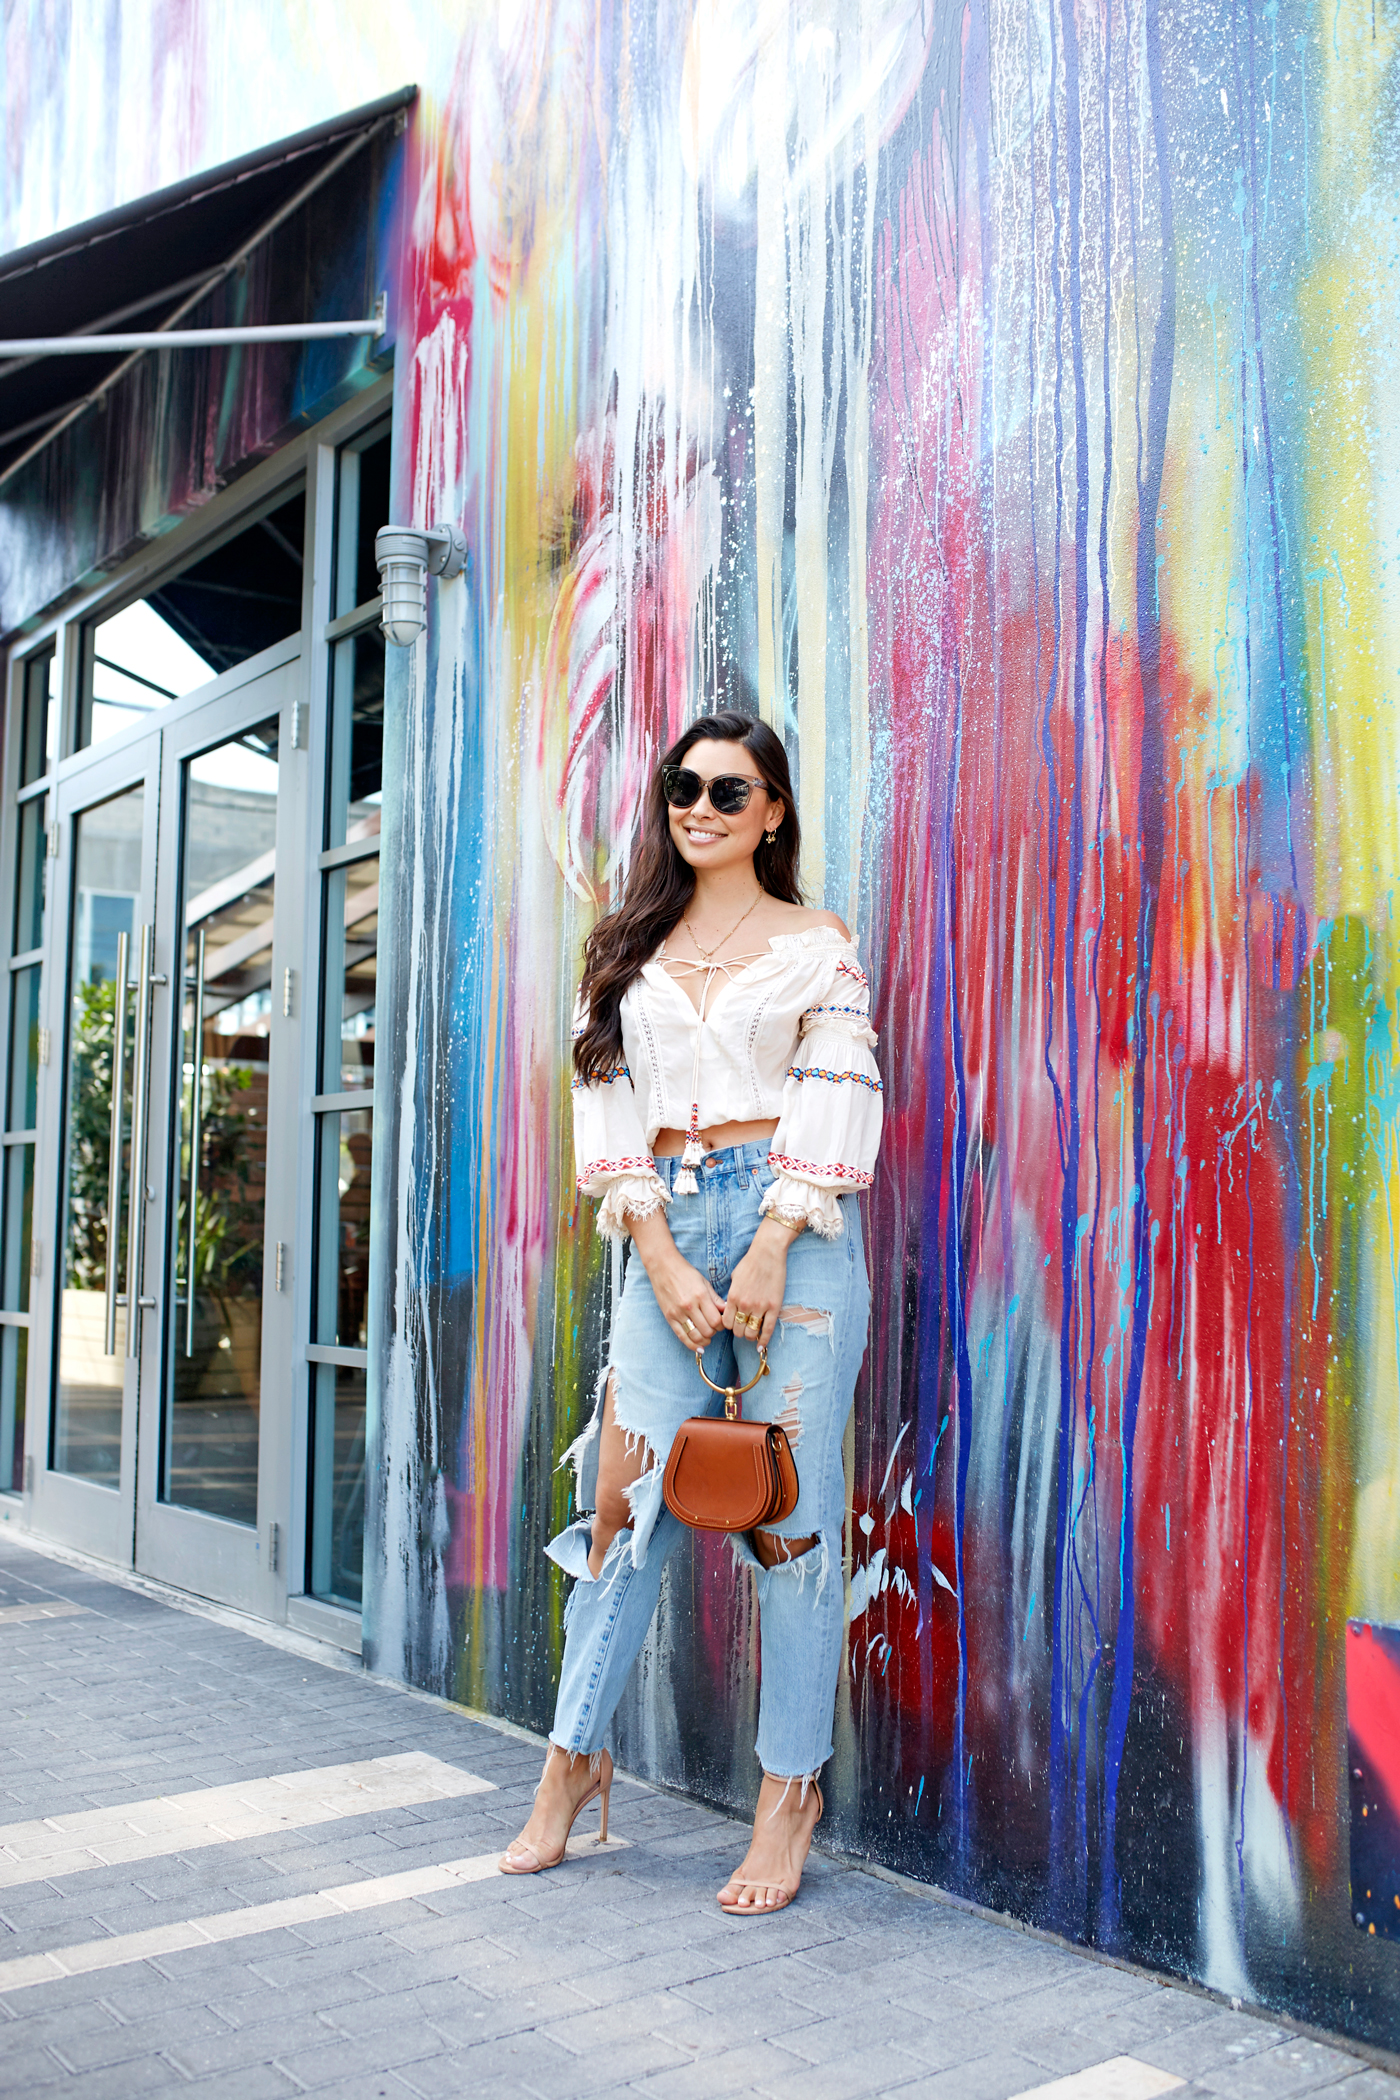 Wynwood Art District in Miami | With Love From Kat